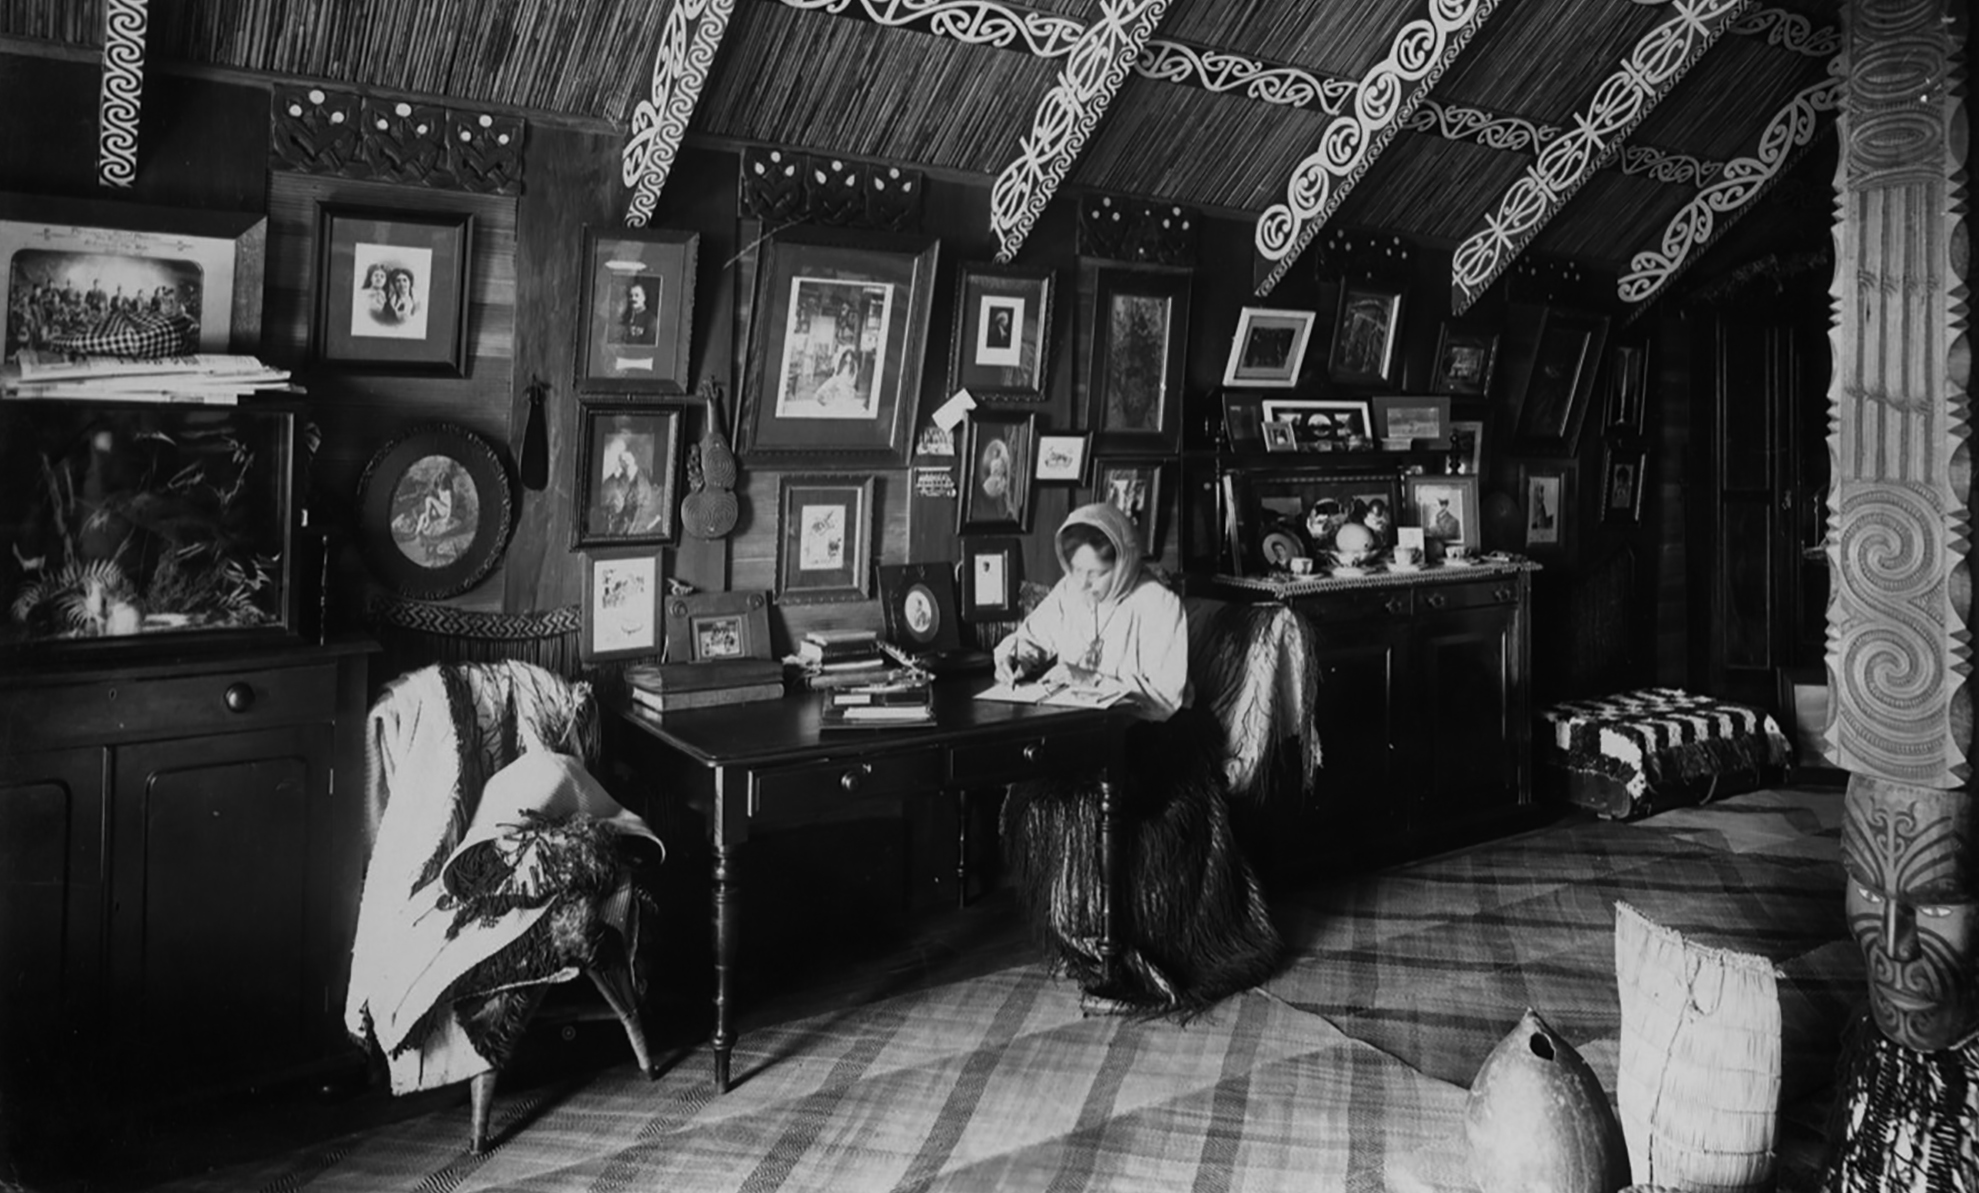 Interior view of a Maori house with a person sat at small table against a wall with many framed pictures.